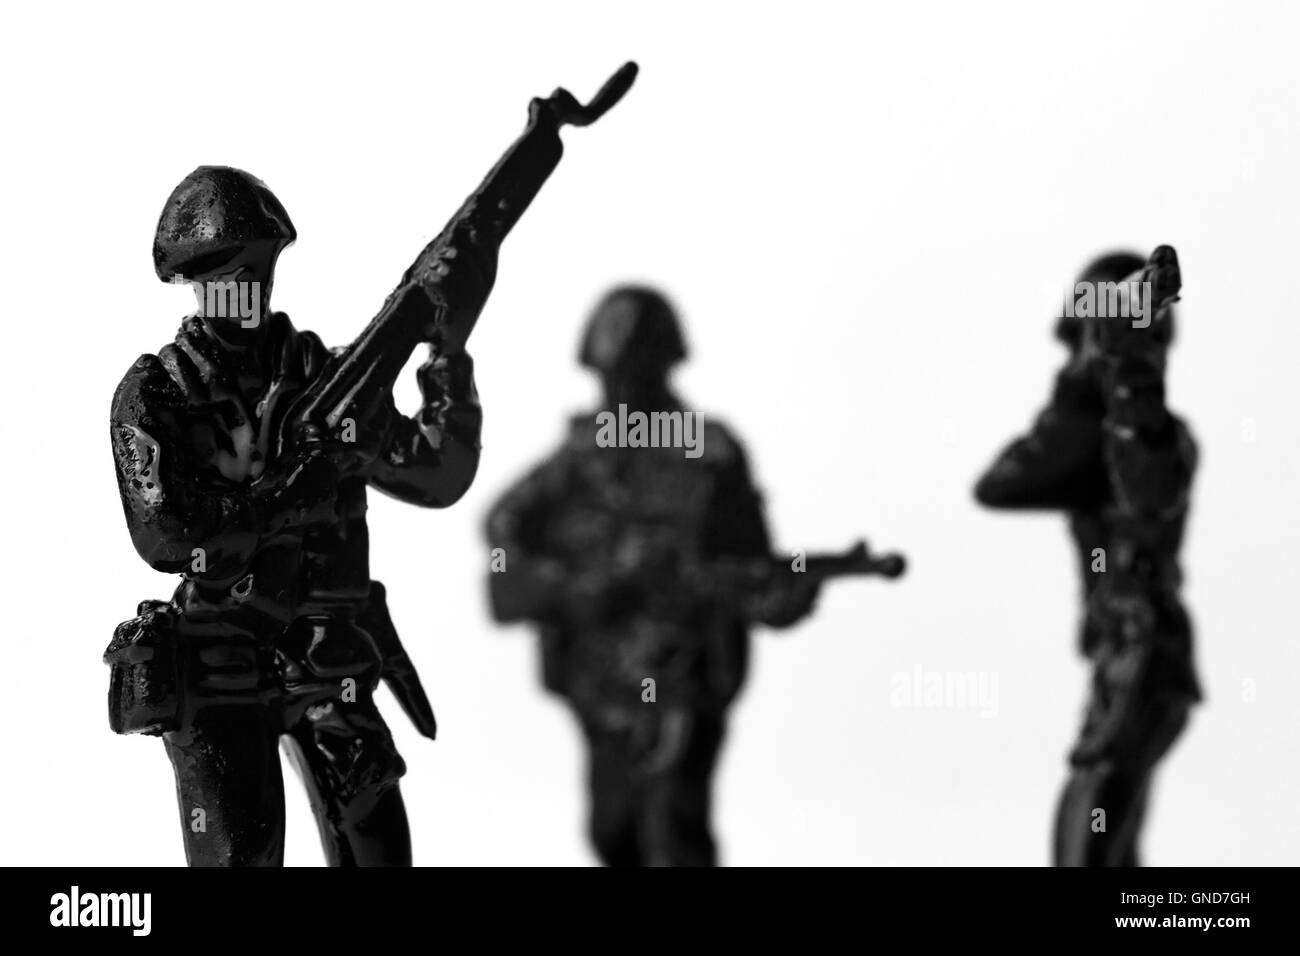 Dramatic toy army soldiers lined up for battle in black and white image Stock Photo